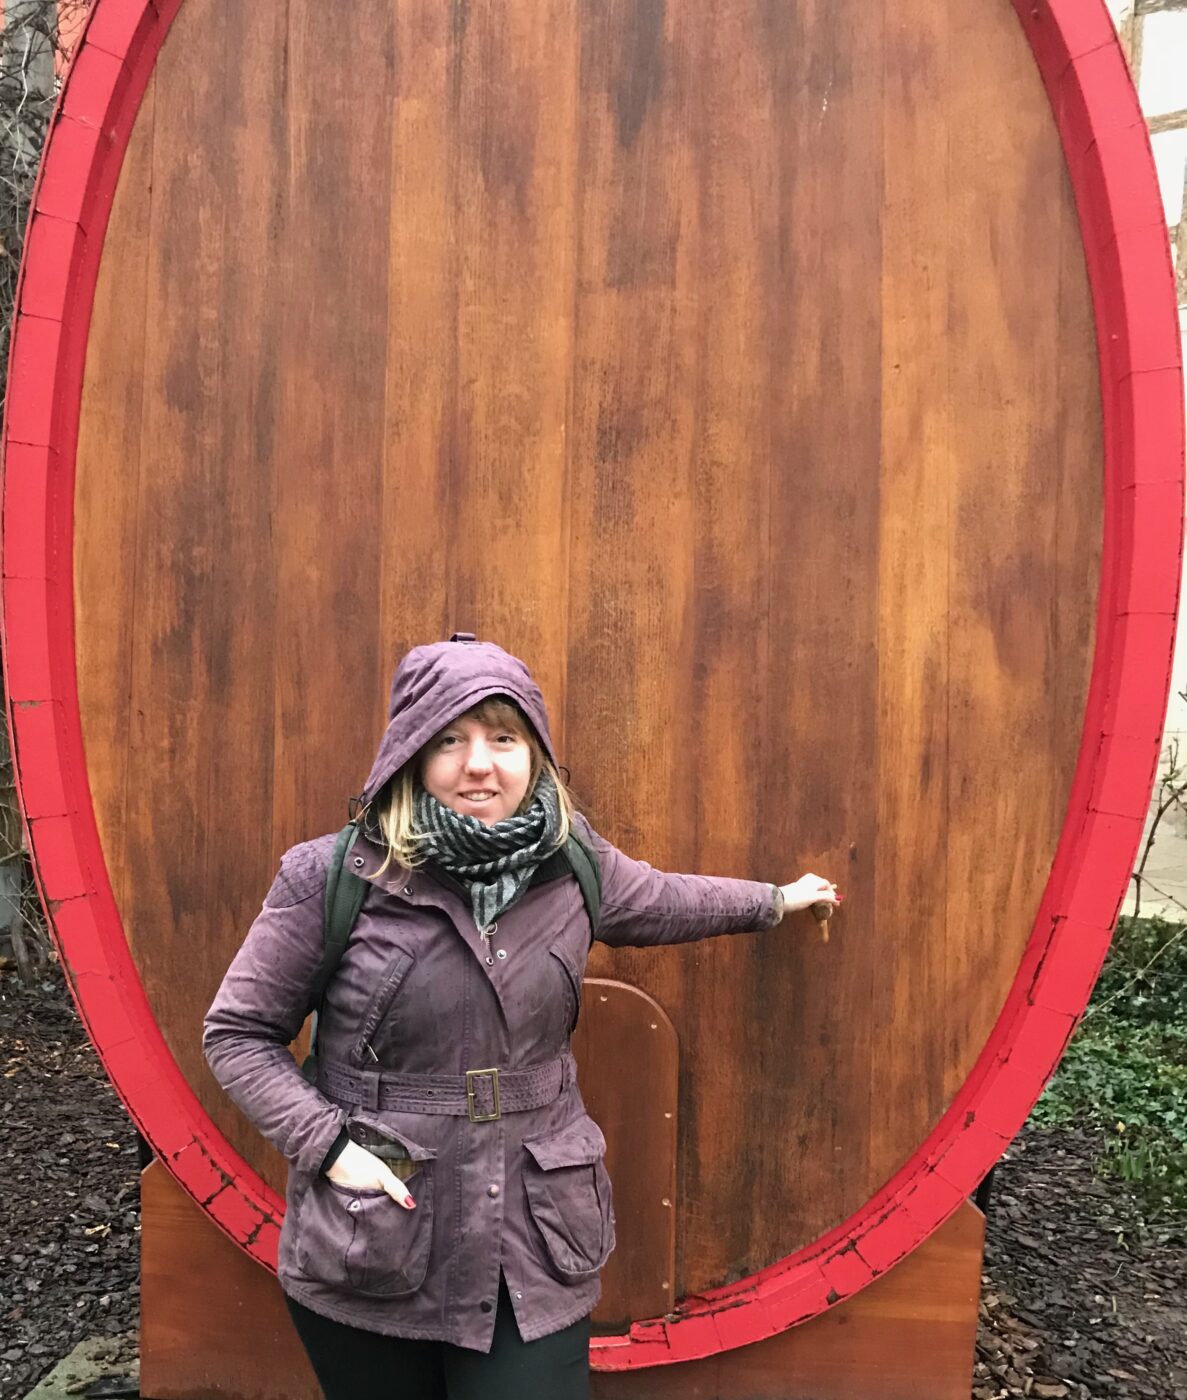 Woman smiling while standing with her hood up in front of a foudre.